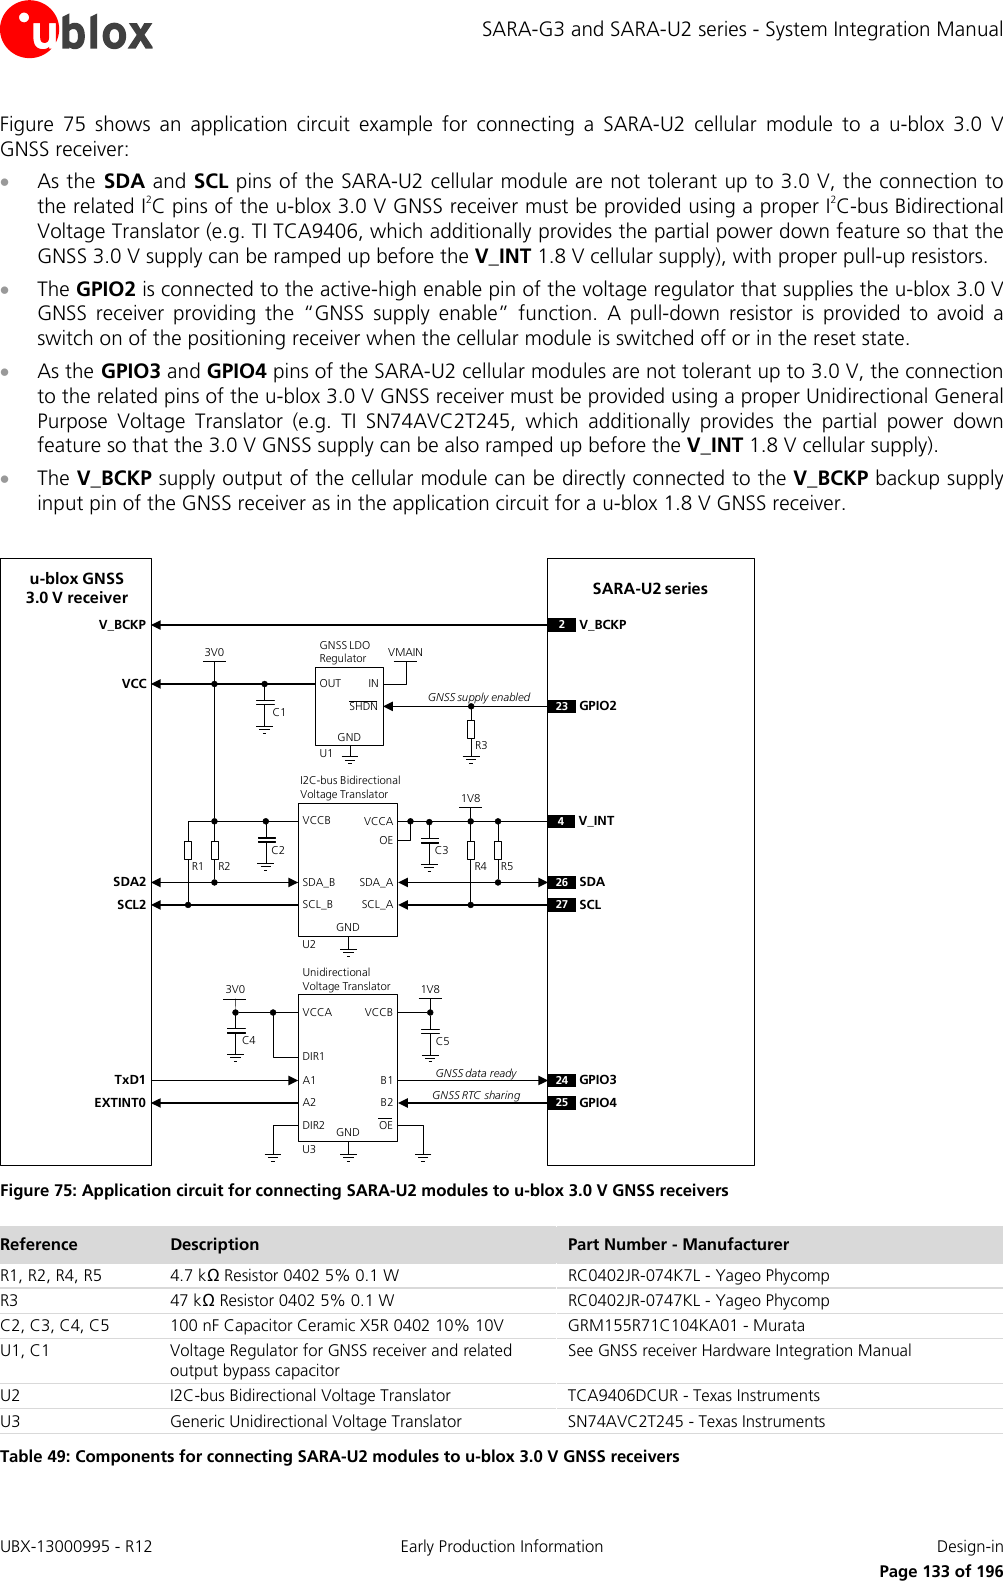 SARA-G3 and SARA-U2 series - System Integration Manual Figure  75 shows an application circuit example for connecting a SARA-U2 cellular module to a u-blox 3.0 V GNSS receiver: • As the SDA and SCL pins of the SARA-U2 cellular module are not tolerant up to 3.0 V, the connection to the related I2C pins of the u-blox 3.0 V GNSS receiver must be provided using a proper I2C-bus Bidirectional Voltage Translator (e.g. TI TCA9406, which additionally provides the partial power down feature so that the GNSS 3.0 V supply can be ramped up before the V_INT 1.8 V cellular supply), with proper pull-up resistors. • The GPIO2 is connected to the active-high enable pin of the voltage regulator that supplies the u-blox 3.0 V GNSS receiver providing the “GNSS supply enable” function. A pull-down resistor is provided to avoid a switch on of the positioning receiver when the cellular module is switched off or in the reset state. • As the GPIO3 and GPIO4 pins of the SARA-U2 cellular modules are not tolerant up to 3.0 V, the connection to the related pins of the u-blox 3.0 V GNSS receiver must be provided using a proper Unidirectional General Purpose Voltage Translator (e.g. TI SN74AVC2T245, which additionally provides the partial power down feature so that the 3.0 V GNSS supply can be also ramped up before the V_INT 1.8 V cellular supply). • The V_BCKP supply output of the cellular module can be directly connected to the V_BCKP backup supply input pin of the GNSS receiver as in the application circuit for a u-blox 1.8 V GNSS receiver.  SARA-U2 seriesu-blox GNSS 3.0 V receiver24 GPIO325 GPIO41V8B1 A1GNDU3B2A2VCCBVCCAUnidirectionalVoltage TranslatorC4 C53V0TxD1EXTINT0R1INOUTGNDGNSS LDORegulatorSHDNR2VMAIN3V0U123 GPIO226 SDA27 SCLR4 R51V8SDA_A SDA_BGNDU2SCL_ASCL_BVCCAVCCBI2C-bus Bidirectional Voltage Translator4V_INTC1C2 C3R3SDA2SCL2VCCDIR1DIR22V_BCKPV_BCKPOEOEGNSS data readyGNSS RTC  sharingGNSS supply enabled Figure 75: Application circuit for connecting SARA-U2 modules to u-blox 3.0 V GNSS receivers Reference Description Part Number - Manufacturer R1, R2, R4, R5 4.7 kΩ Resistor 0402 5% 0.1 W  RC0402JR-074K7L - Yageo Phycomp R3 47 kΩ Resistor 0402 5% 0.1 W  RC0402JR-0747KL - Yageo Phycomp C2, C3, C4, C5 100 nF Capacitor Ceramic X5R 0402 10% 10V GRM155R71C104KA01 - Murata U1, C1 Voltage Regulator for GNSS receiver and related output bypass capacitor See GNSS receiver Hardware Integration Manual U2 I2C-bus Bidirectional Voltage Translator TCA9406DCUR - Texas Instruments U3 Generic Unidirectional Voltage Translator SN74AVC2T245 - Texas Instruments Table 49: Components for connecting SARA-U2 modules to u-blox 3.0 V GNSS receivers UBX-13000995 - R12 Early Production Information Design-in     Page 133 of 196 